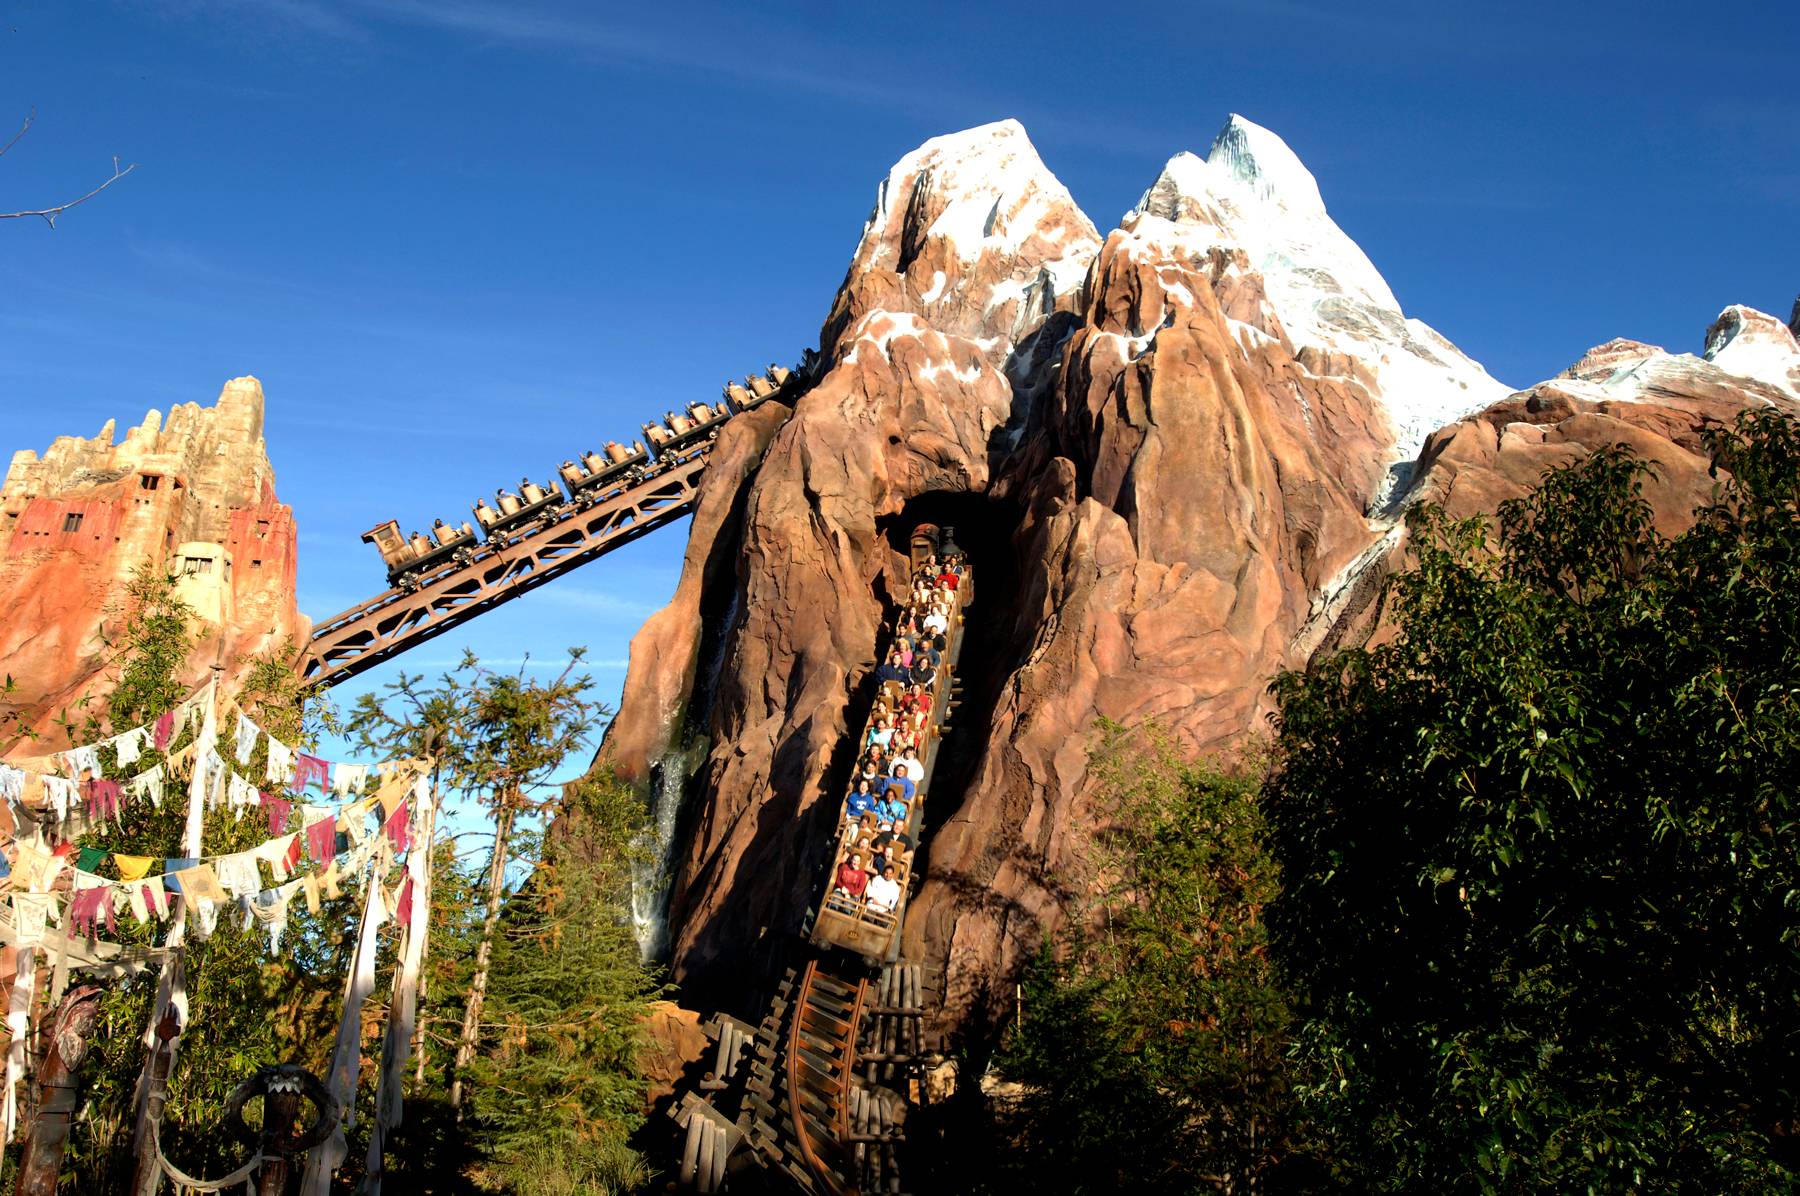 Entertainment on the Everest walkway